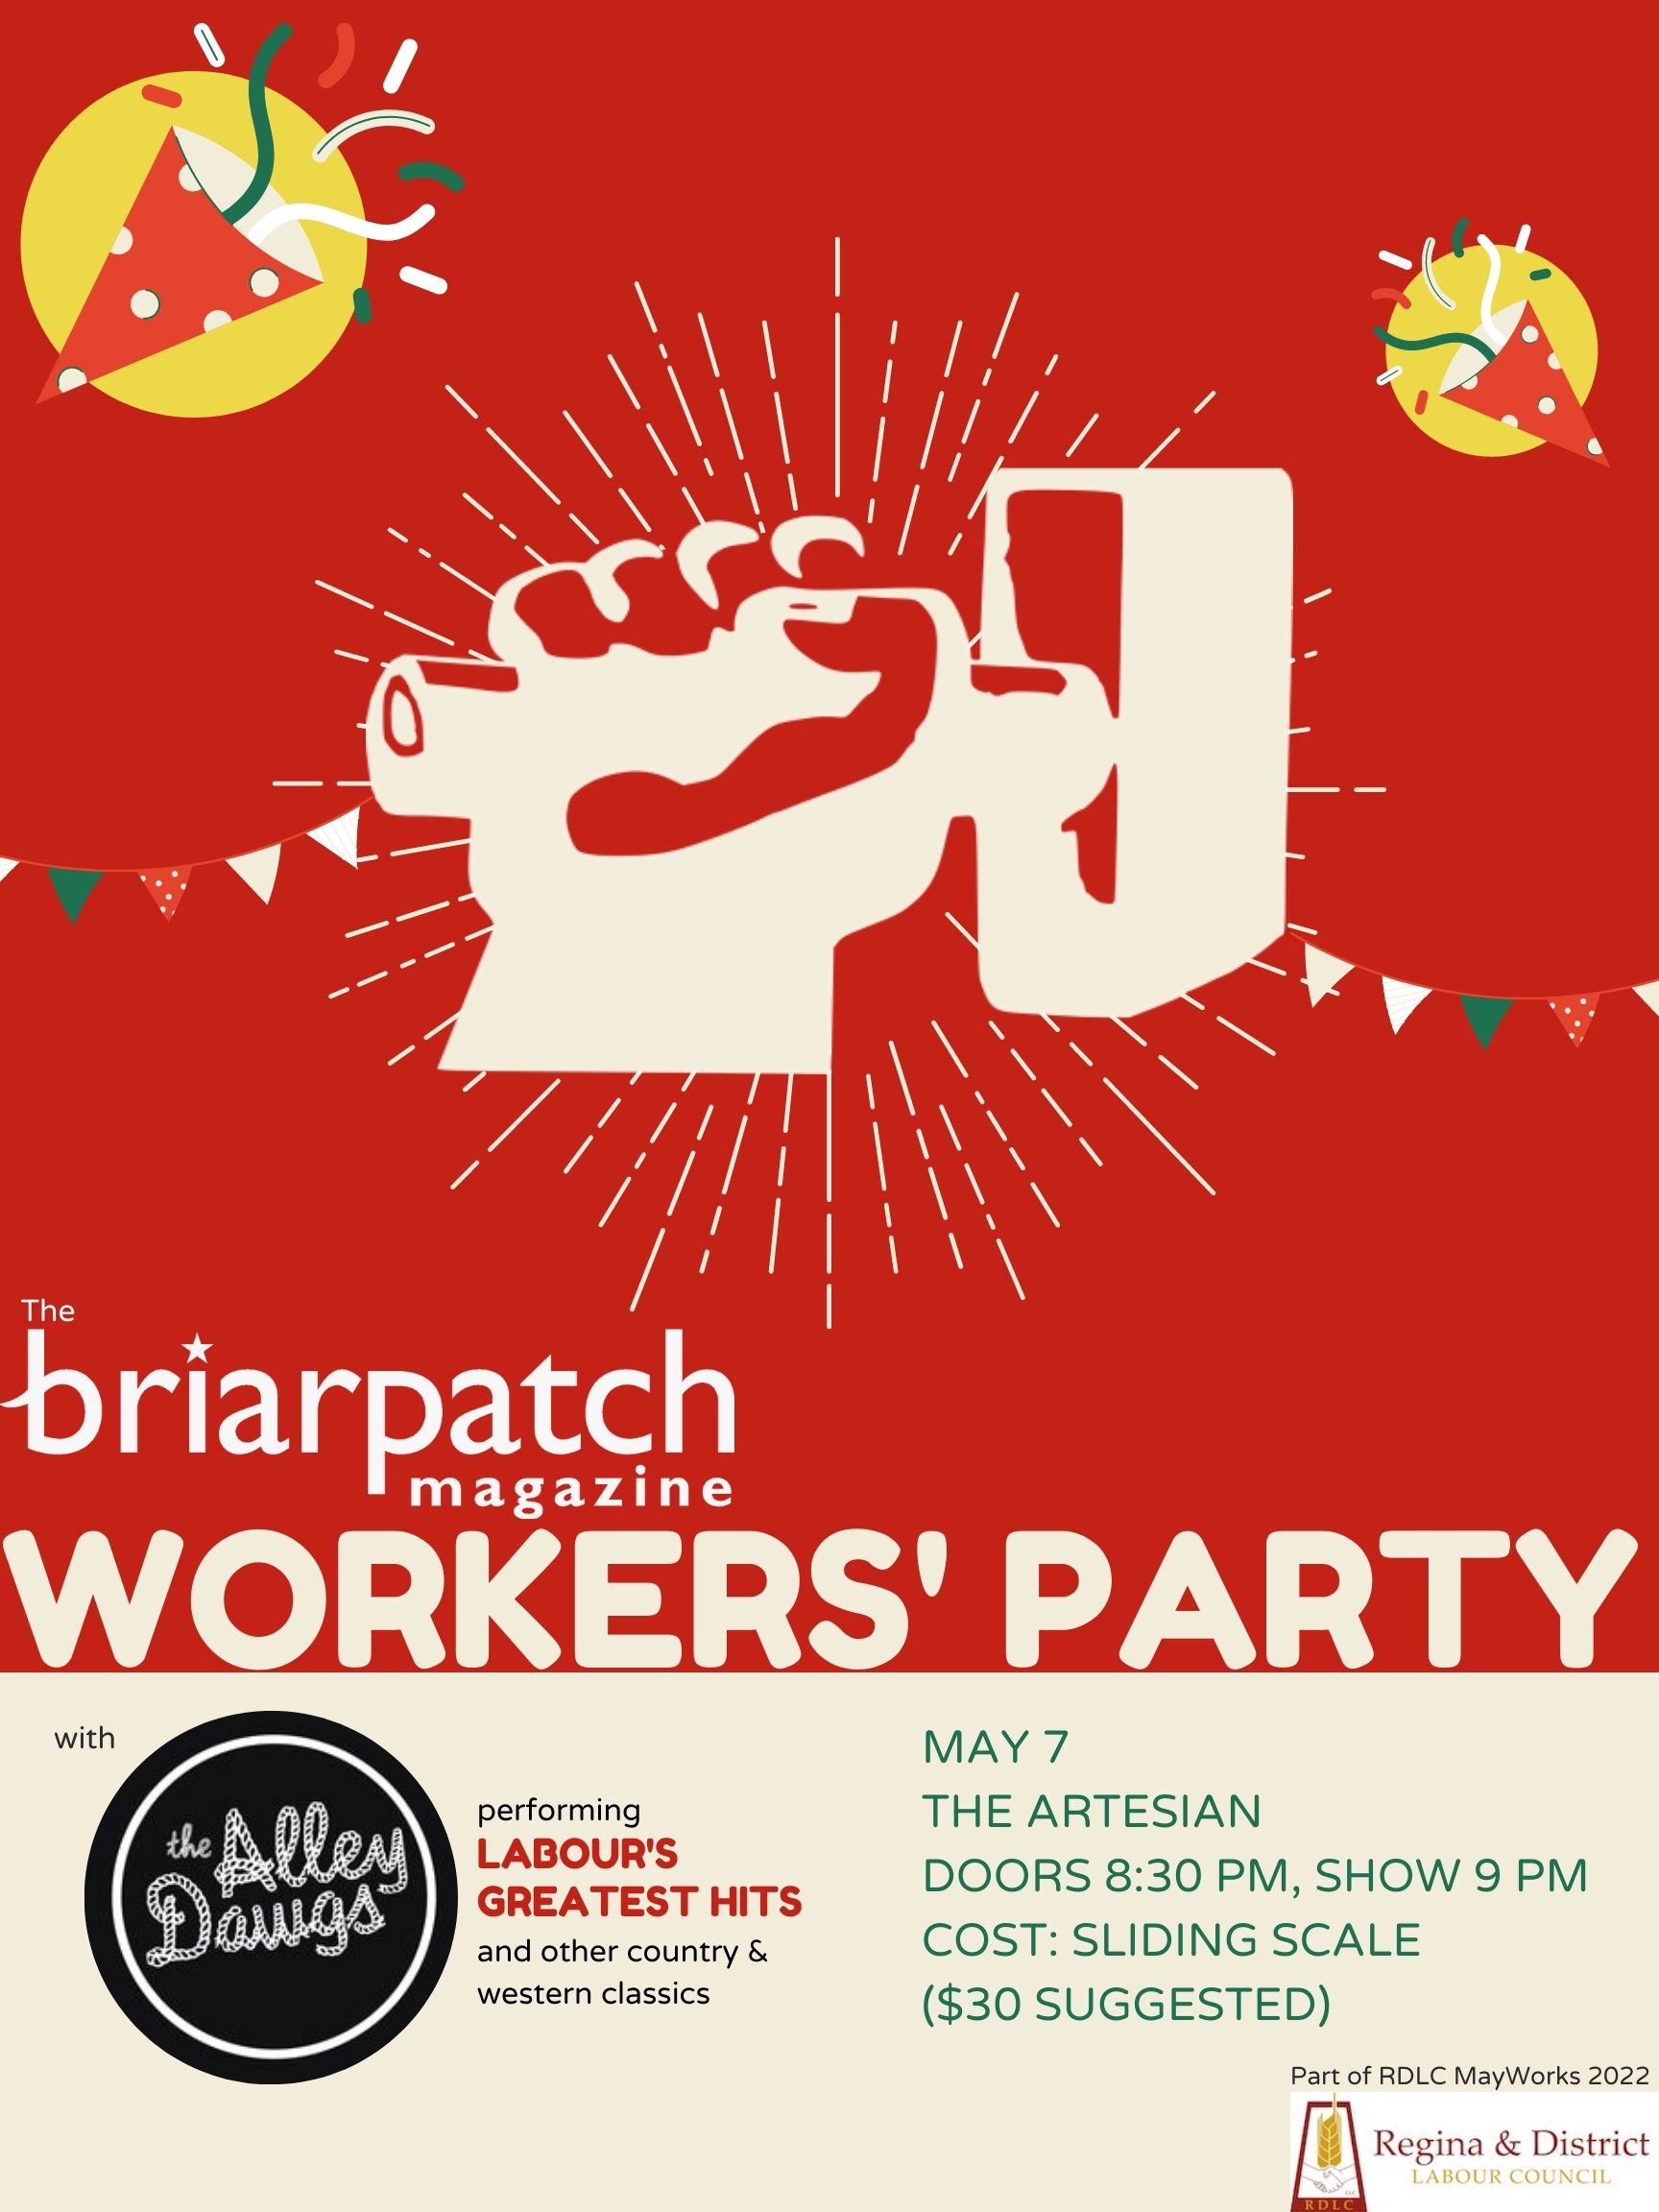 Briarpatch's Workers' Party